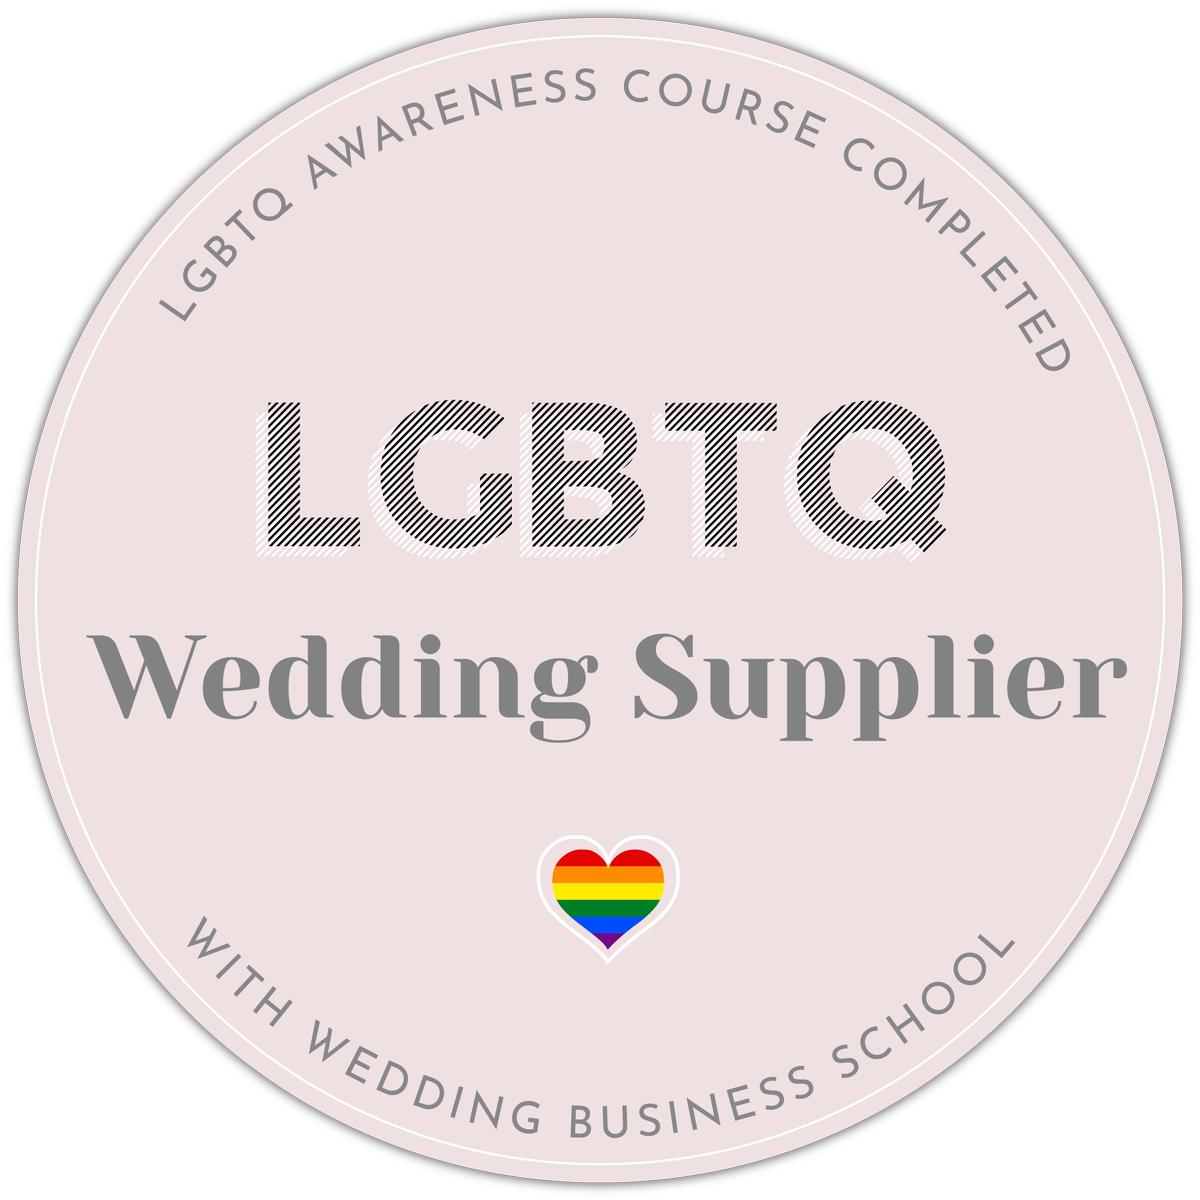 We're so very proud to supply wedding music for everybody and would like you all to know! Thanks so much for the LGBTQ Awareness course @weddingbusinessschool_ #weddingmusicplanner #weddingmusicsupplier #weddingmusic #loveislove #musicisforall #weddingsupplier #LGBTQAwareness